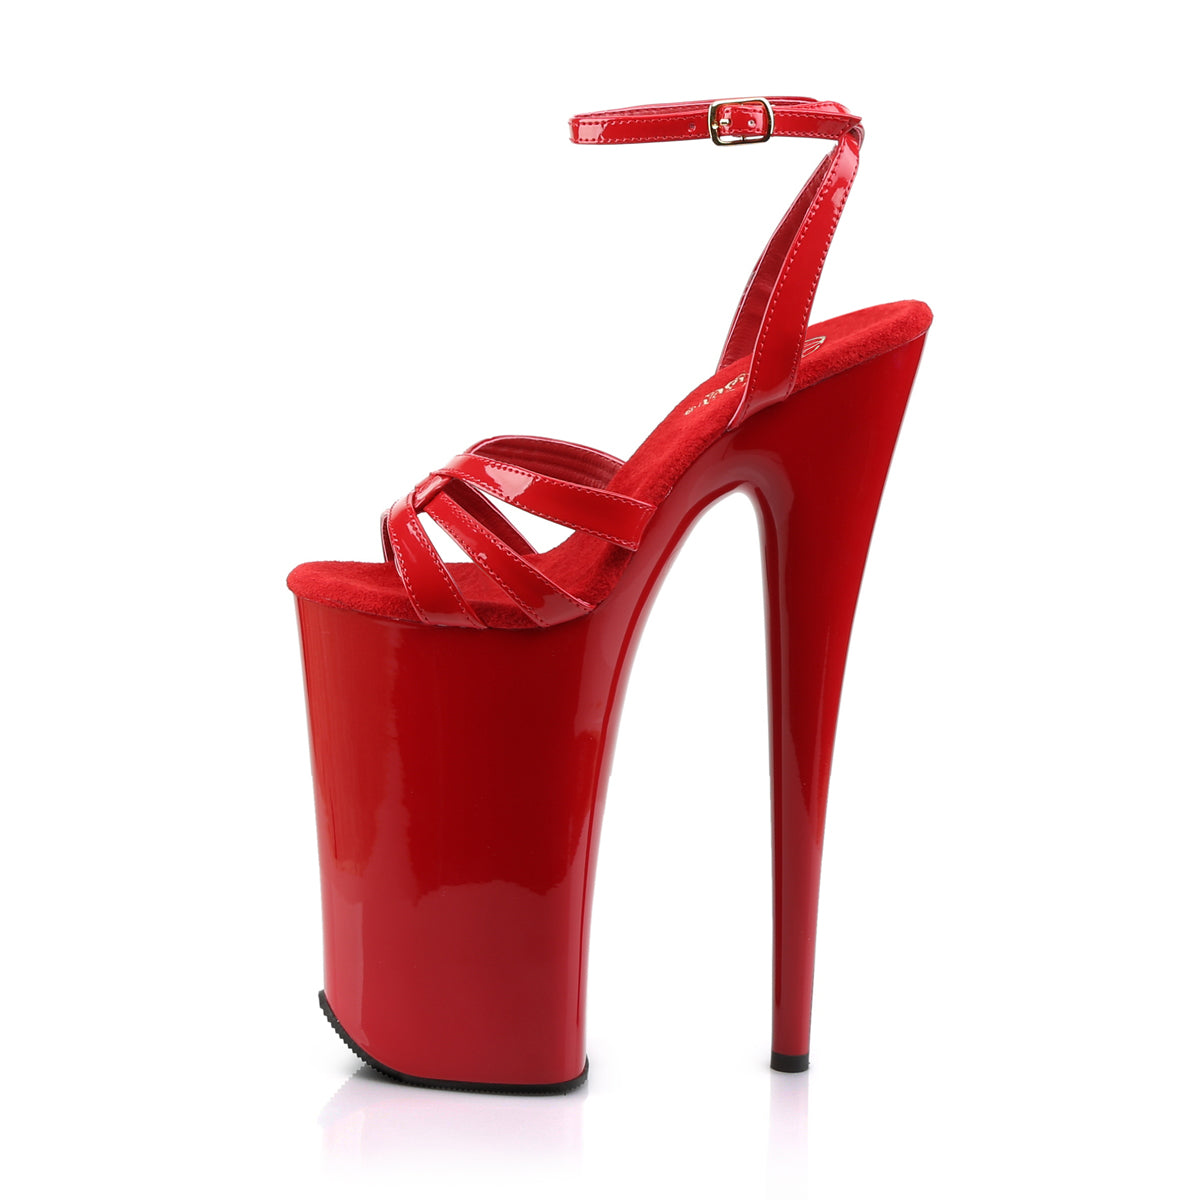 BEYOND-012 Pleaser Red/Red Platform Shoes [Extreme High Heels]